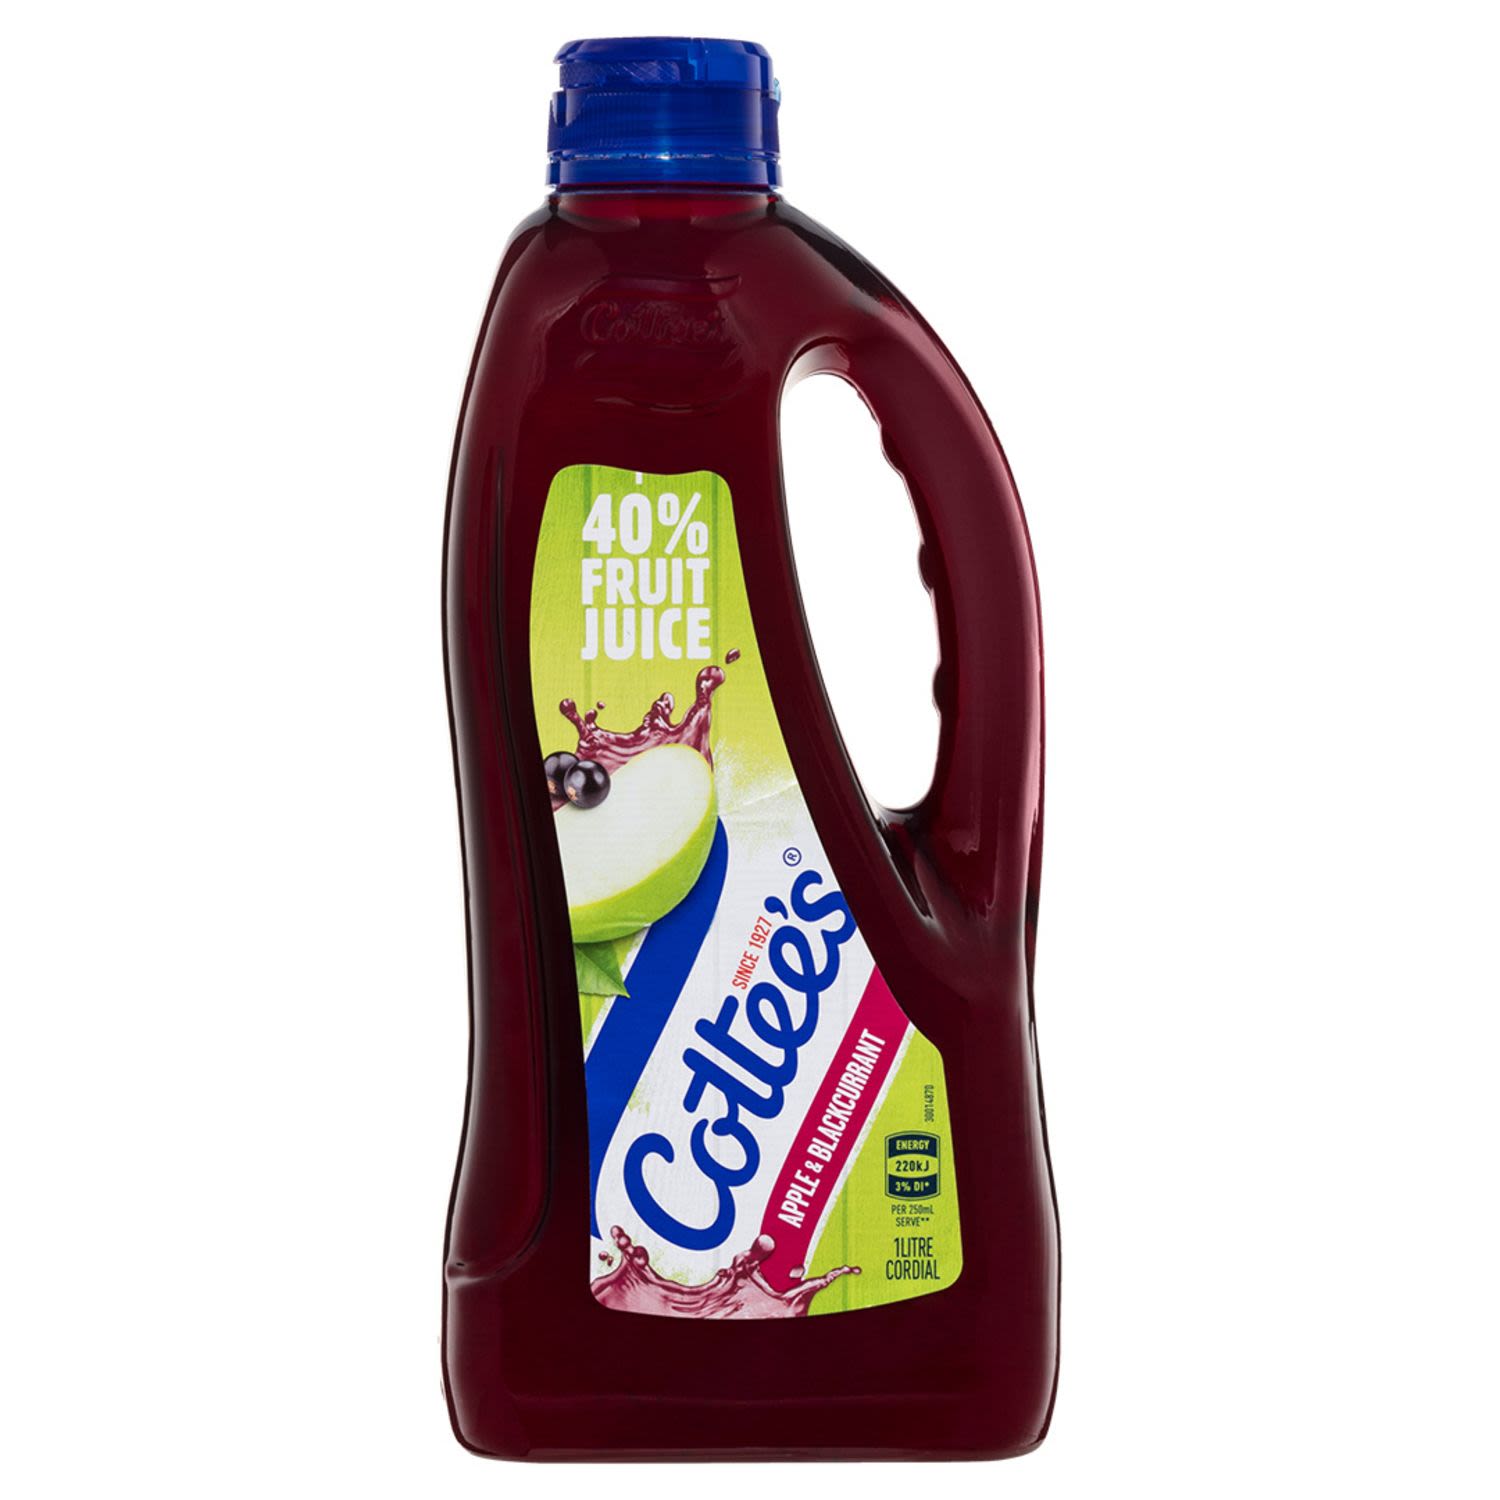 Cottee's Cordial Apple & Blackcurrant, 1 Litre